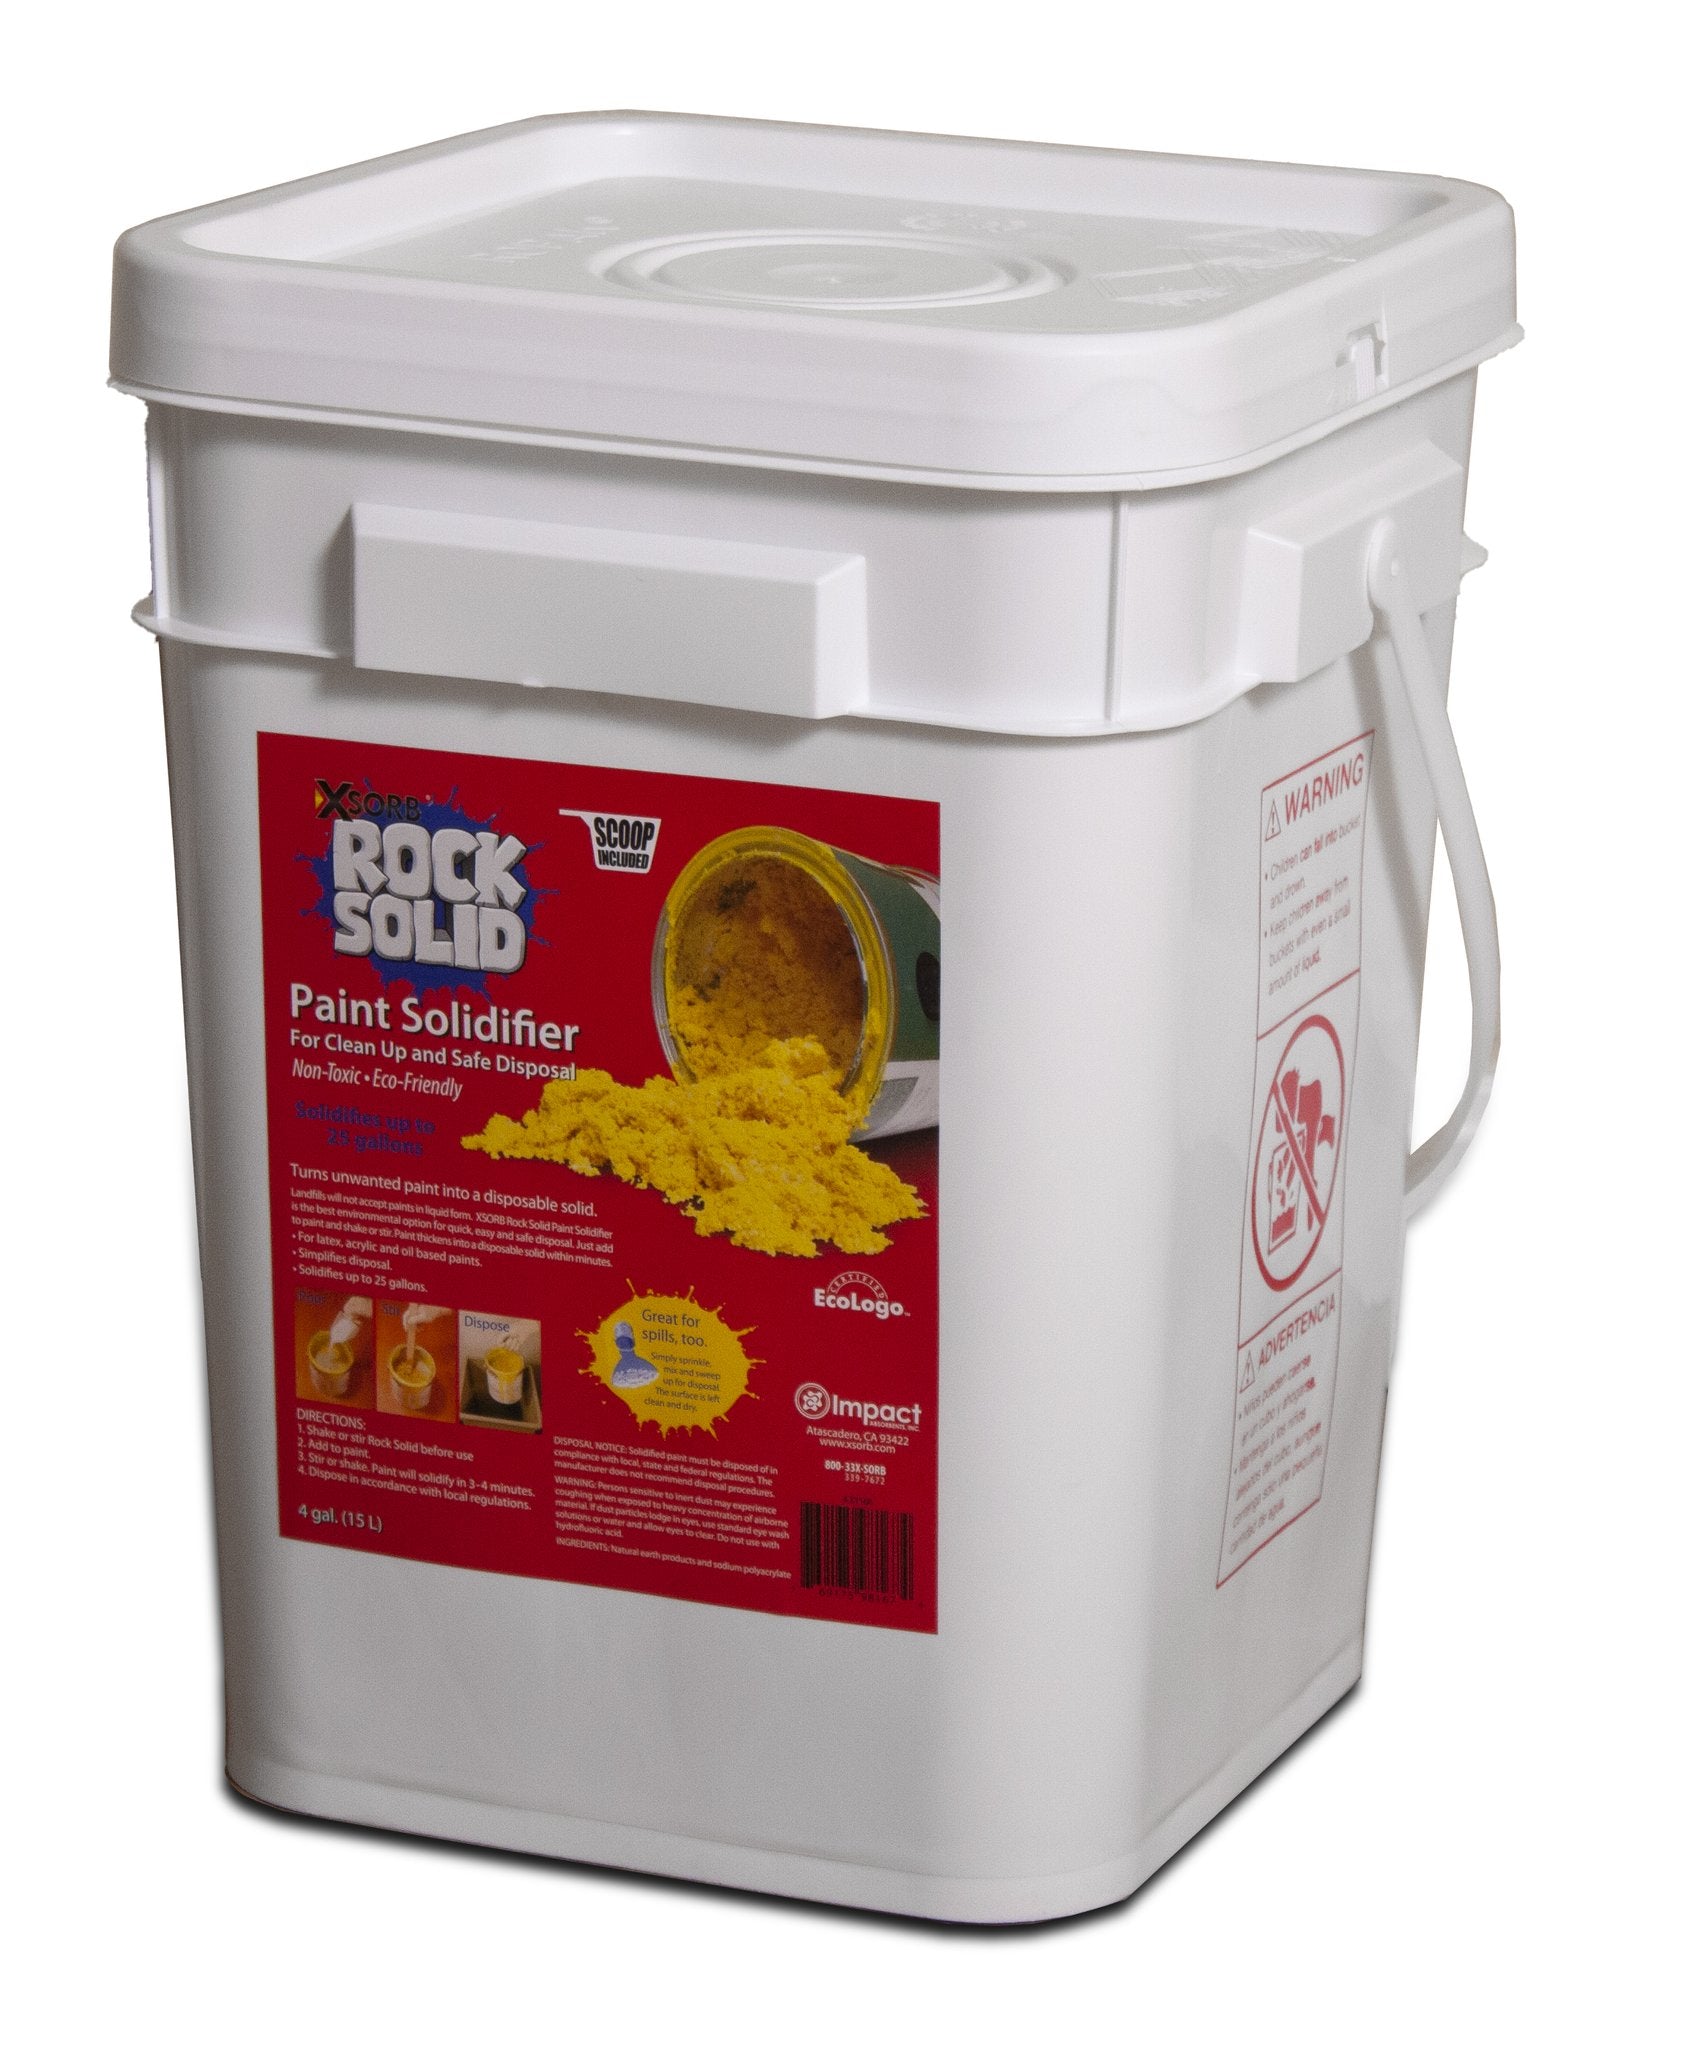 XSORB Rock Solid Paint Hardener Pail 4 gal. with Scoop - 1 PAIL-eSafety Supplies, Inc